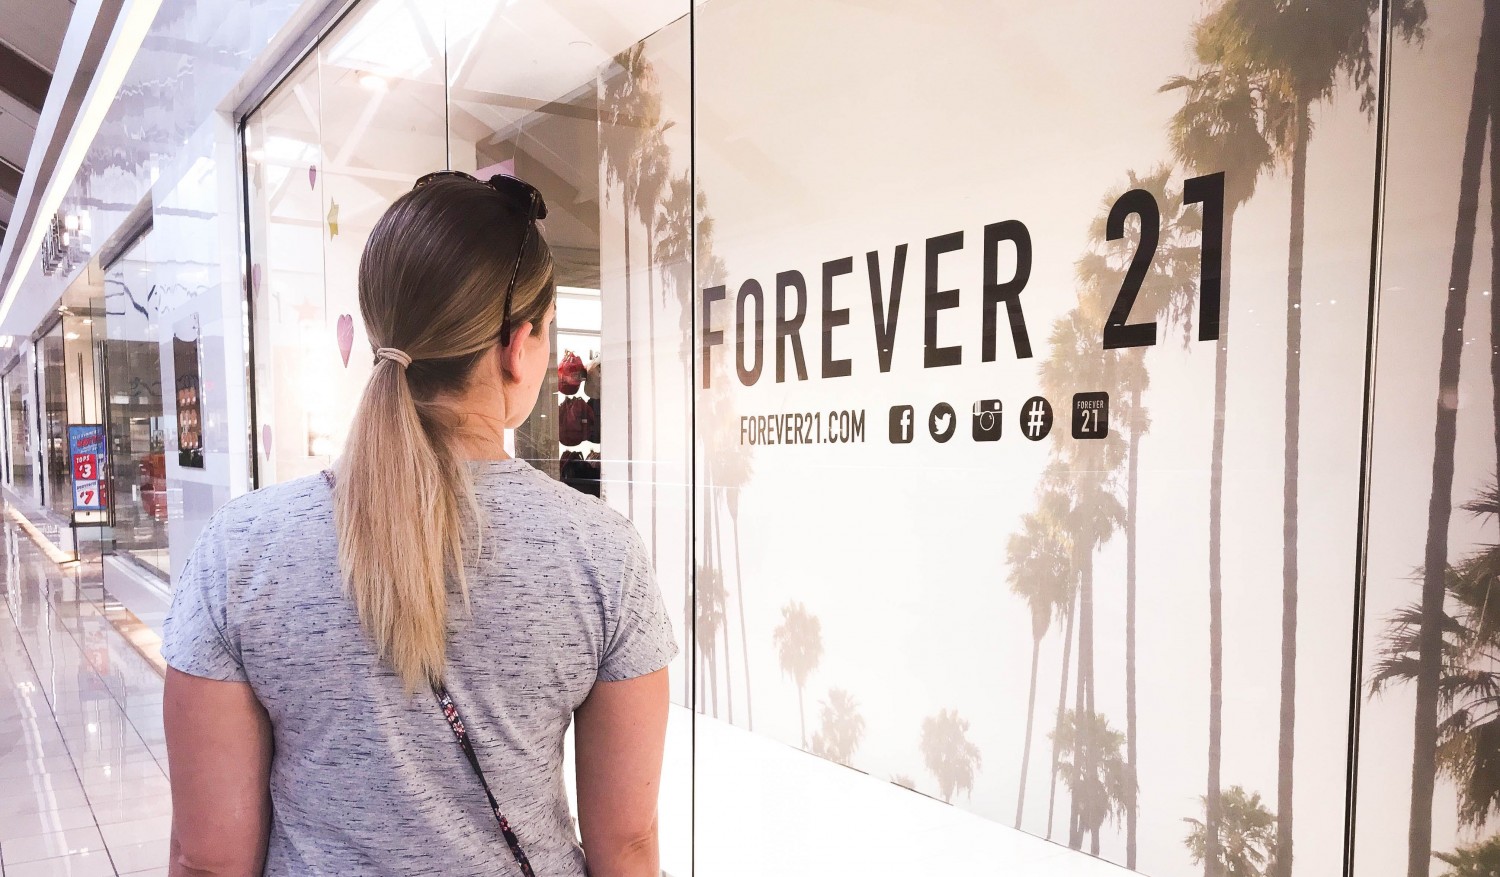 Shein Expands U.S. Presence in Partnership with Forever 21